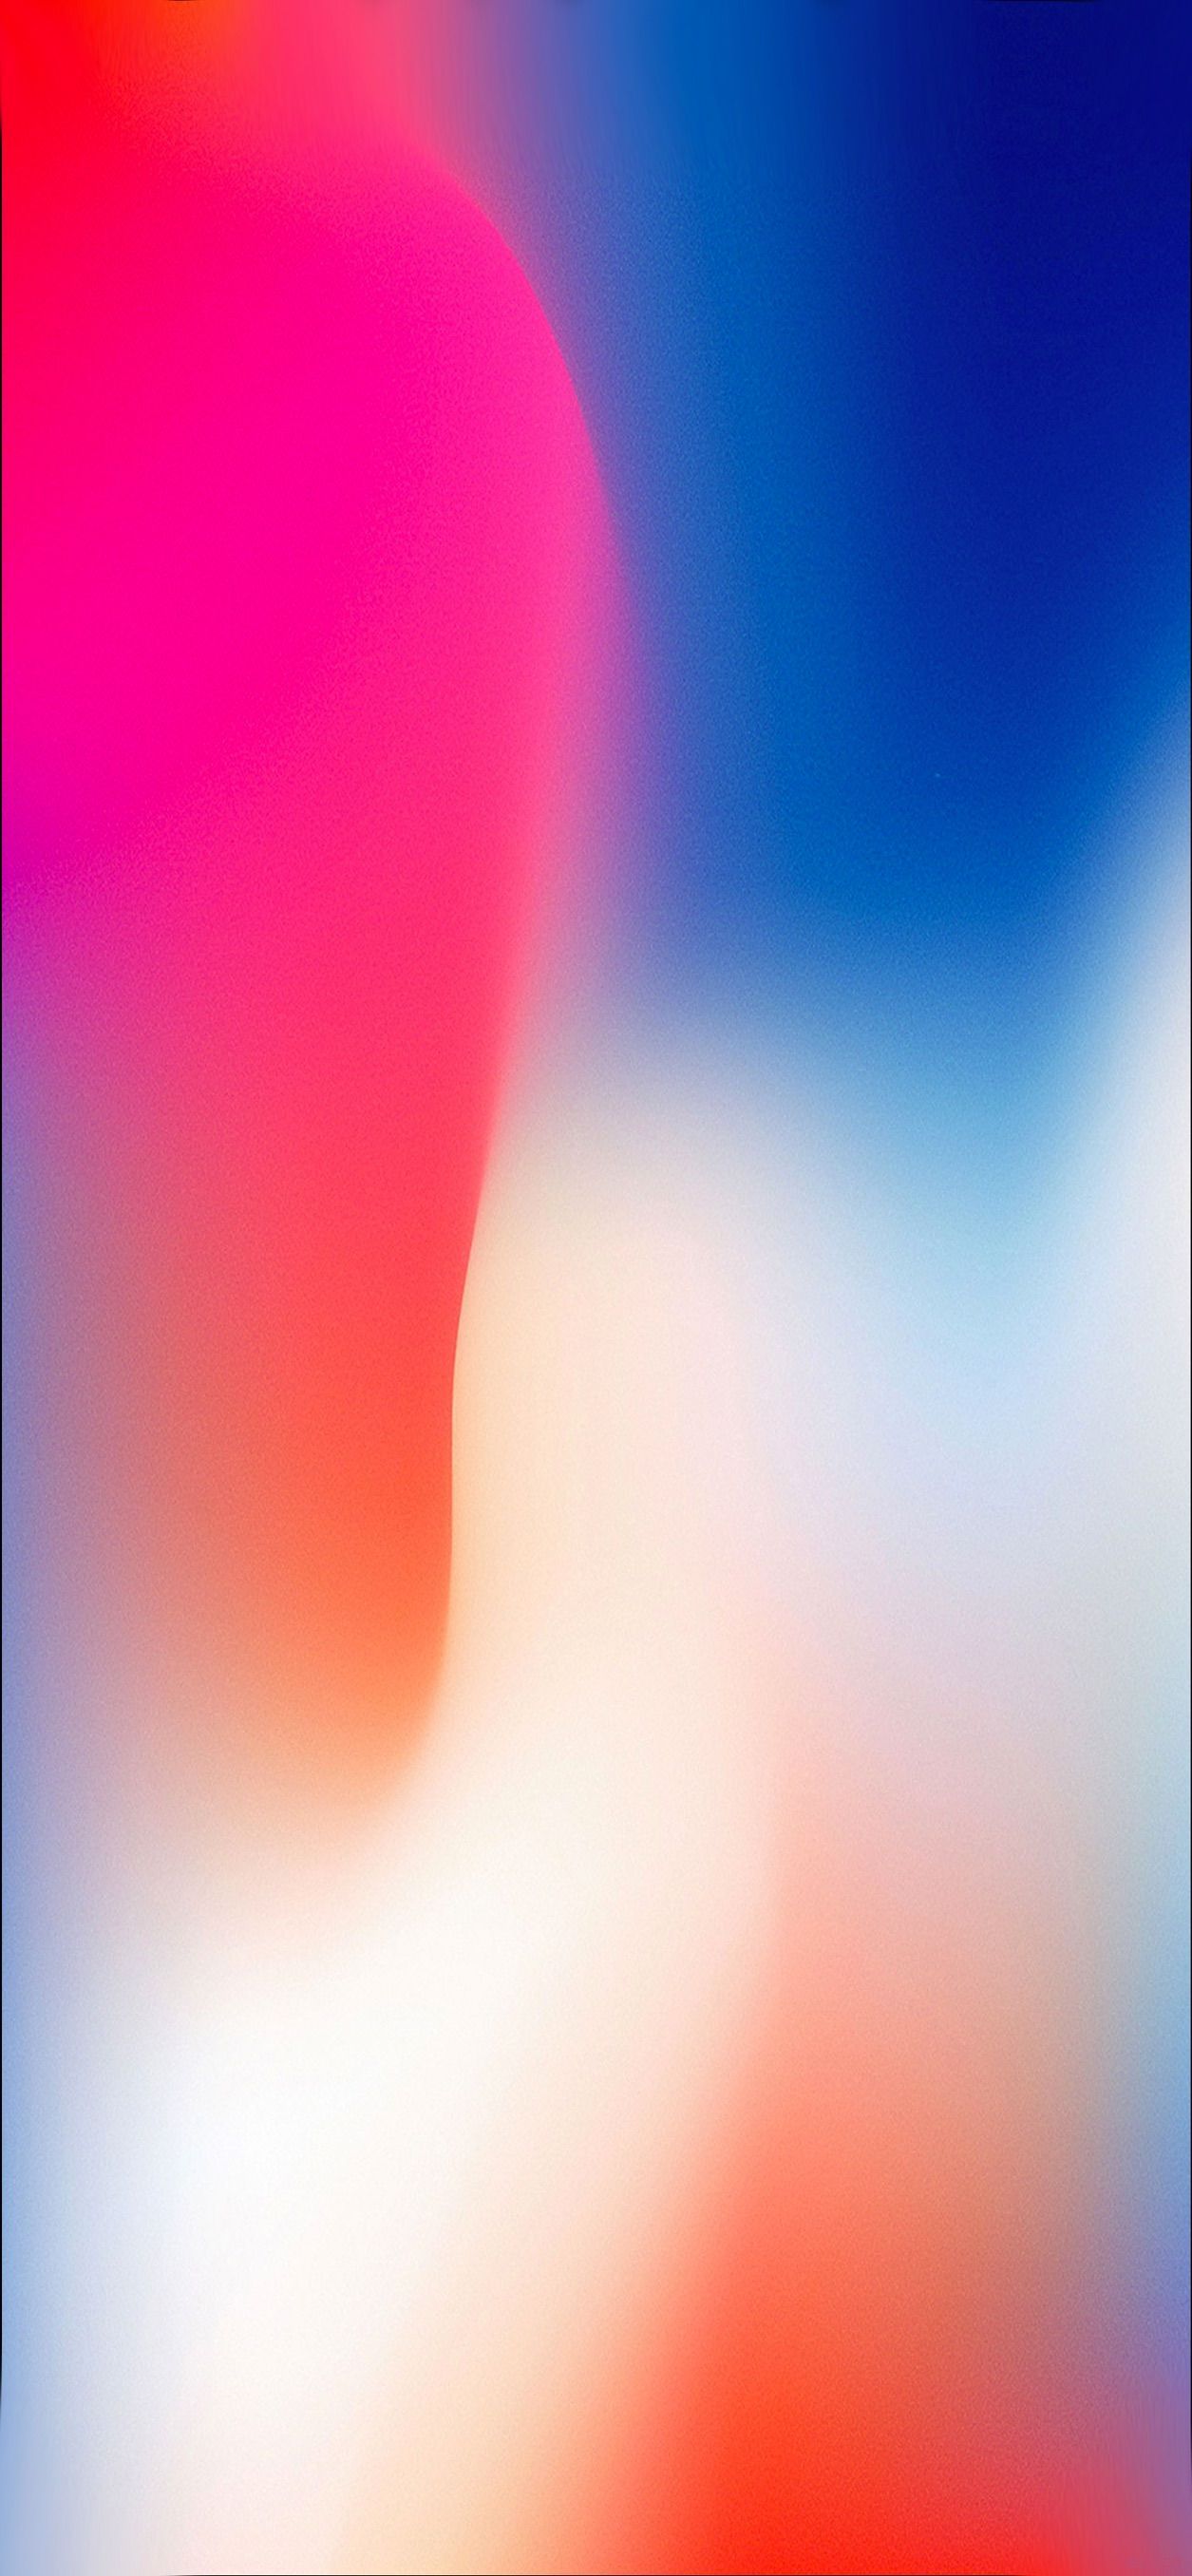 Apple iPhone X HD Wallpapers on WallpaperDog